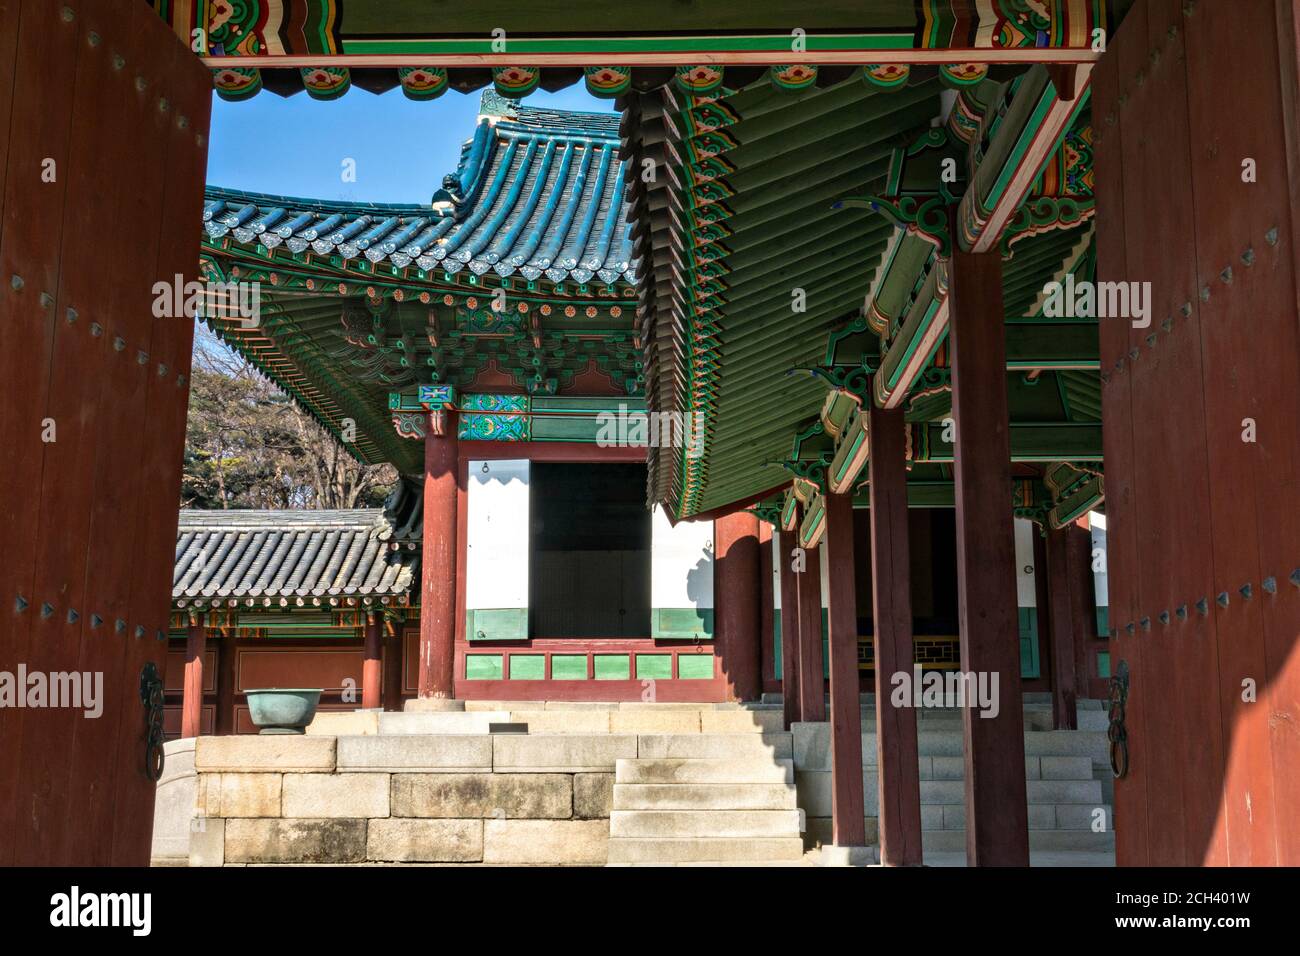 The Seonjeongjeon Hall at the Changdeokgung Palace in Seoul, South Korea. The building was the main place for the emperor to meet with high ranking officials to discuss political, state, and foreign affairs. Stock Photo